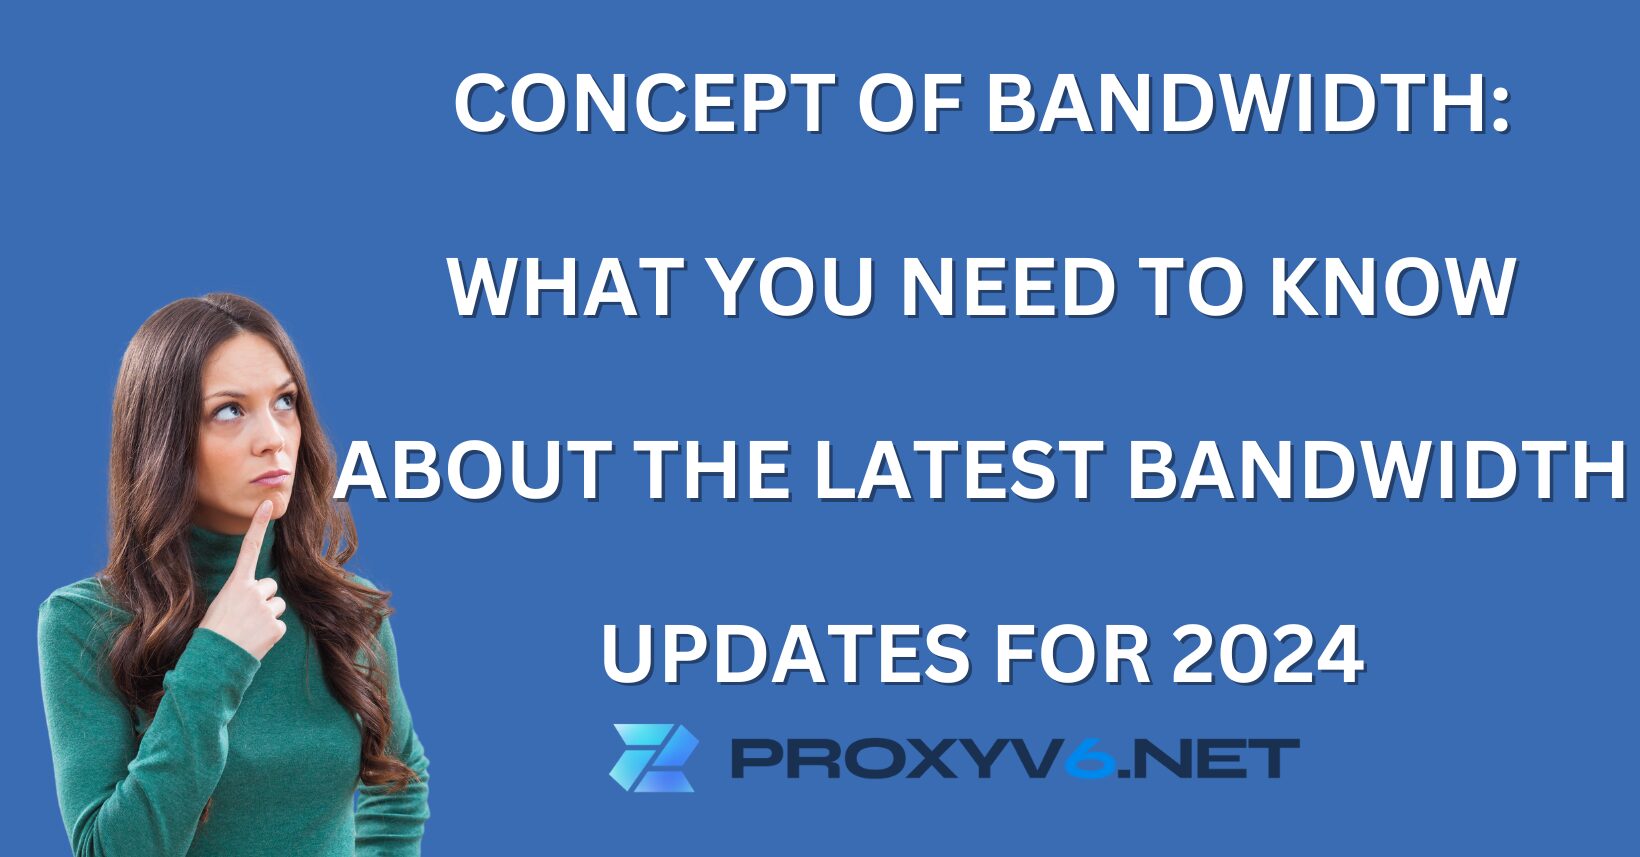 Concept of Bandwidth: What You Need to Know About the Latest Bandwidth Updates for 2024